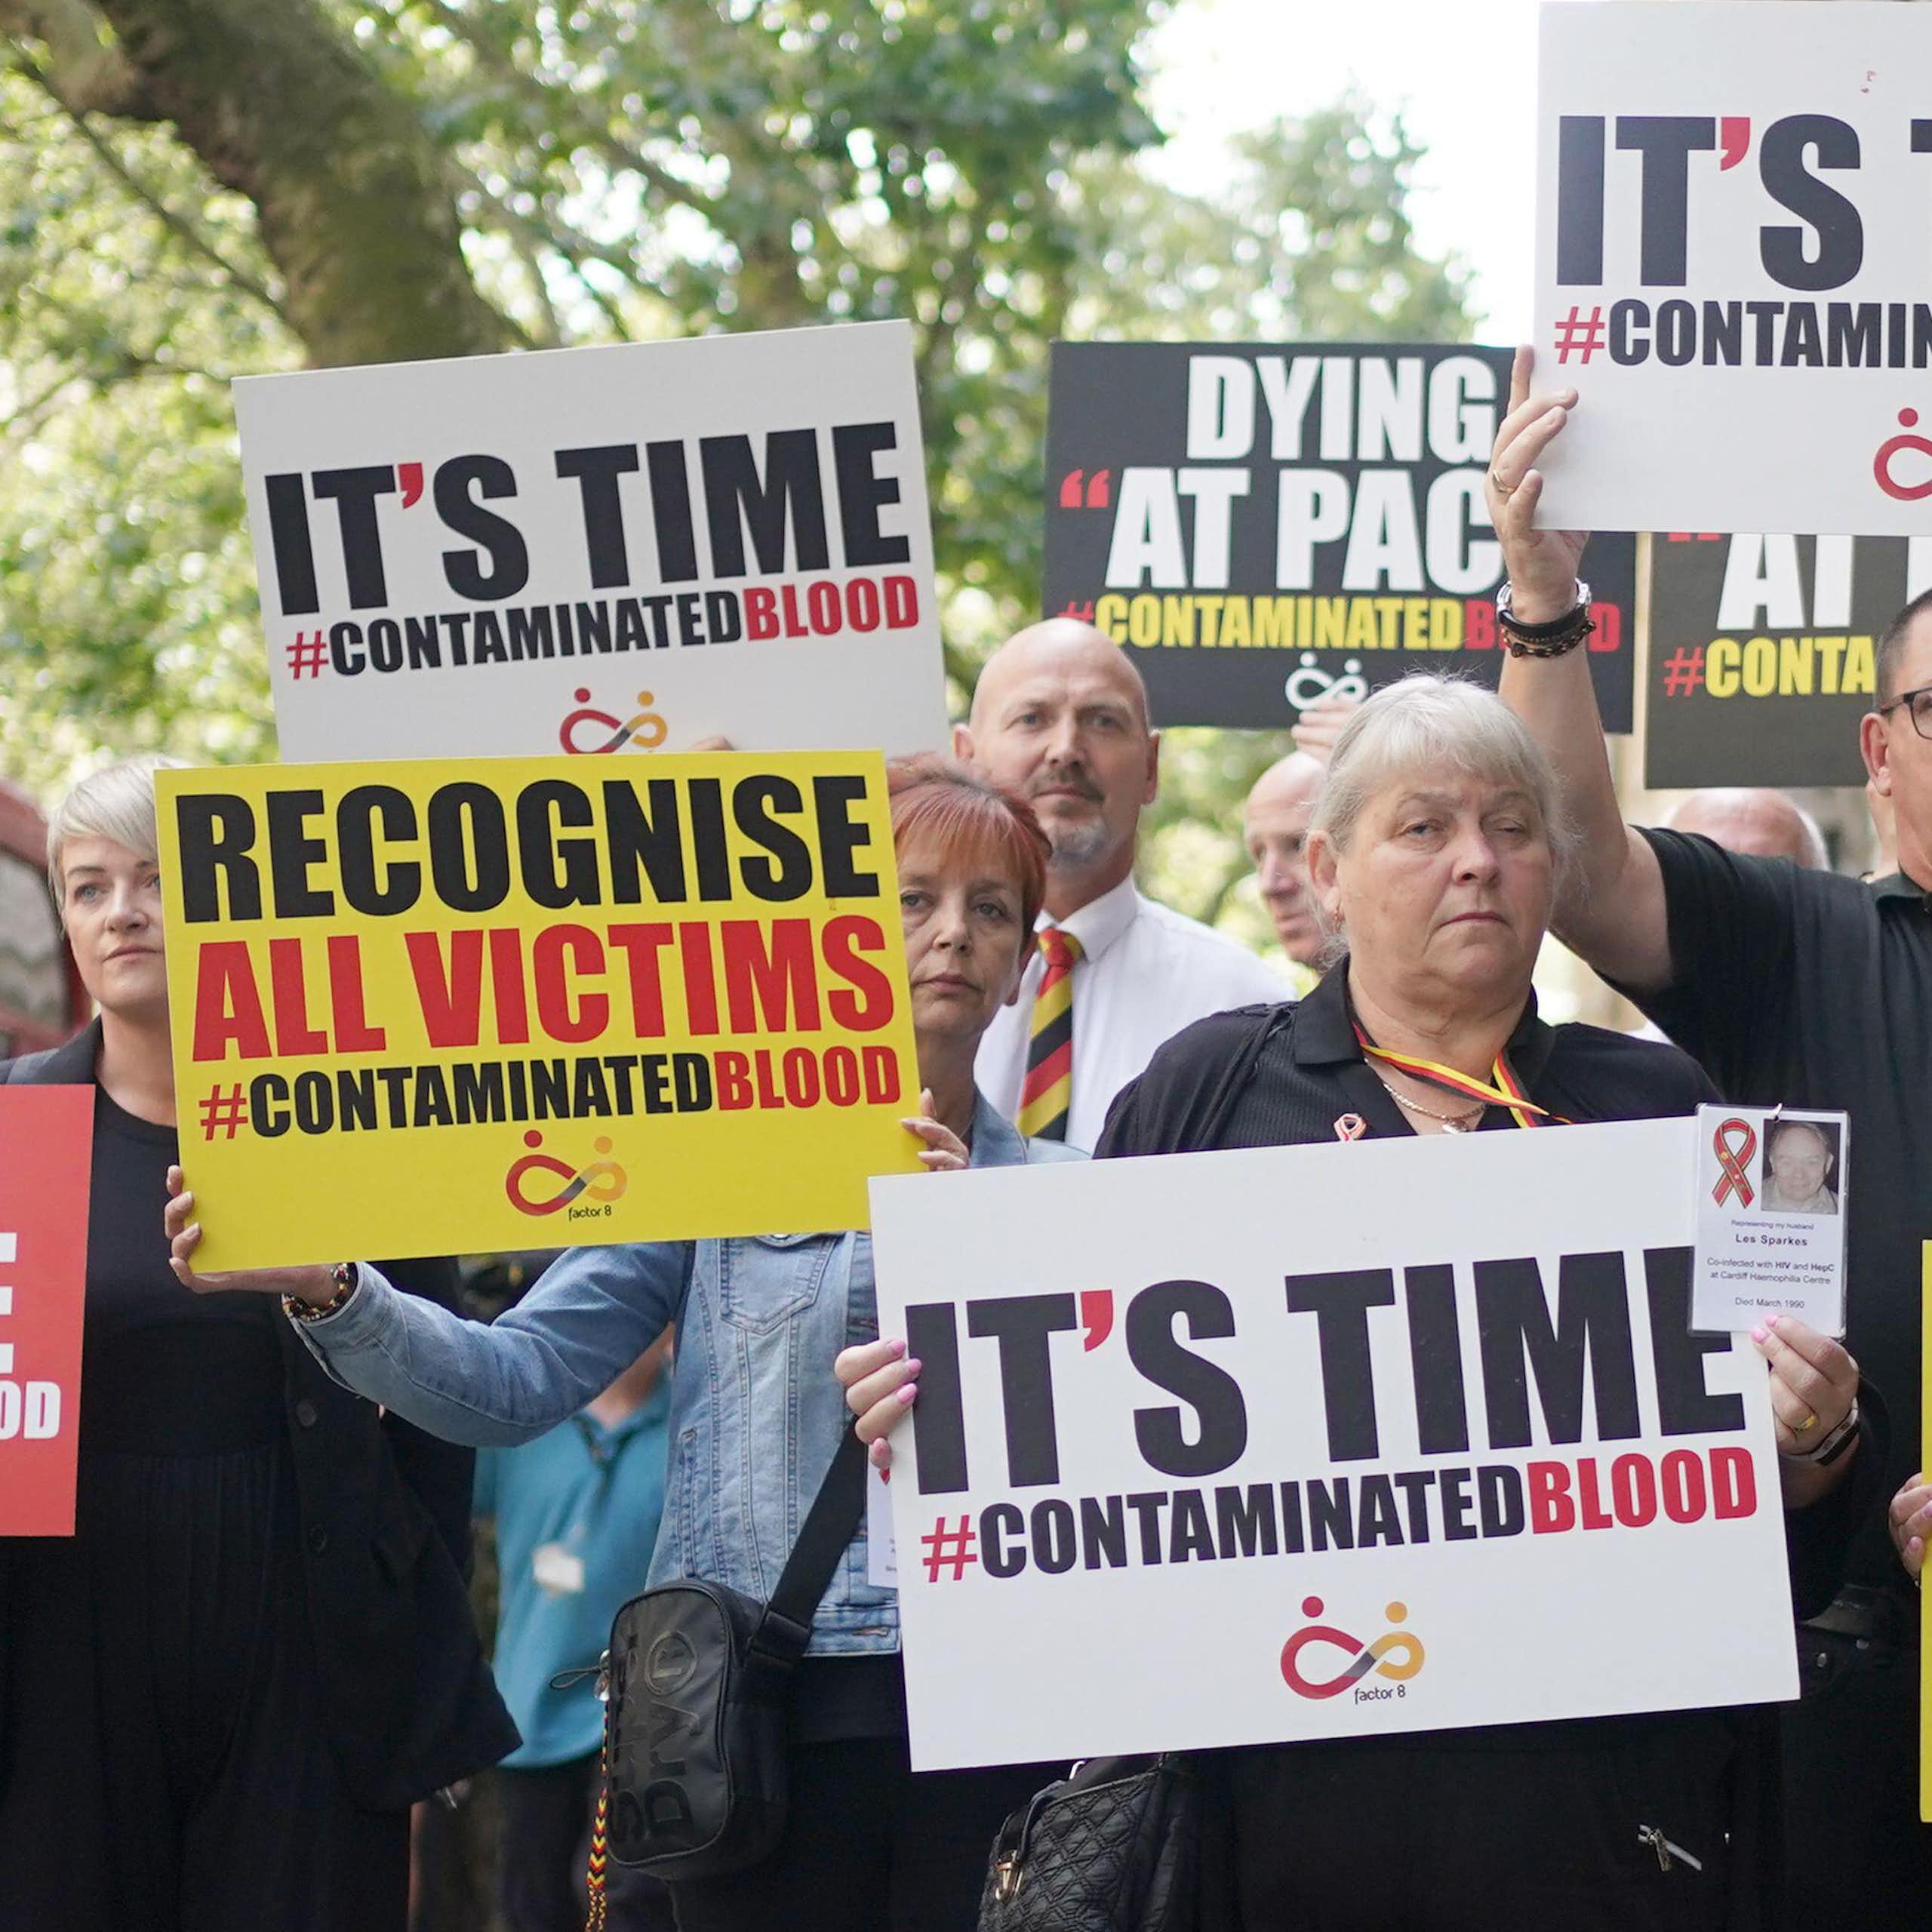 A group of people holding protest signs in red, yellow, black and white colours that say 'it's time' and 'recognise all victims' with the hashtag Contaminated Blood